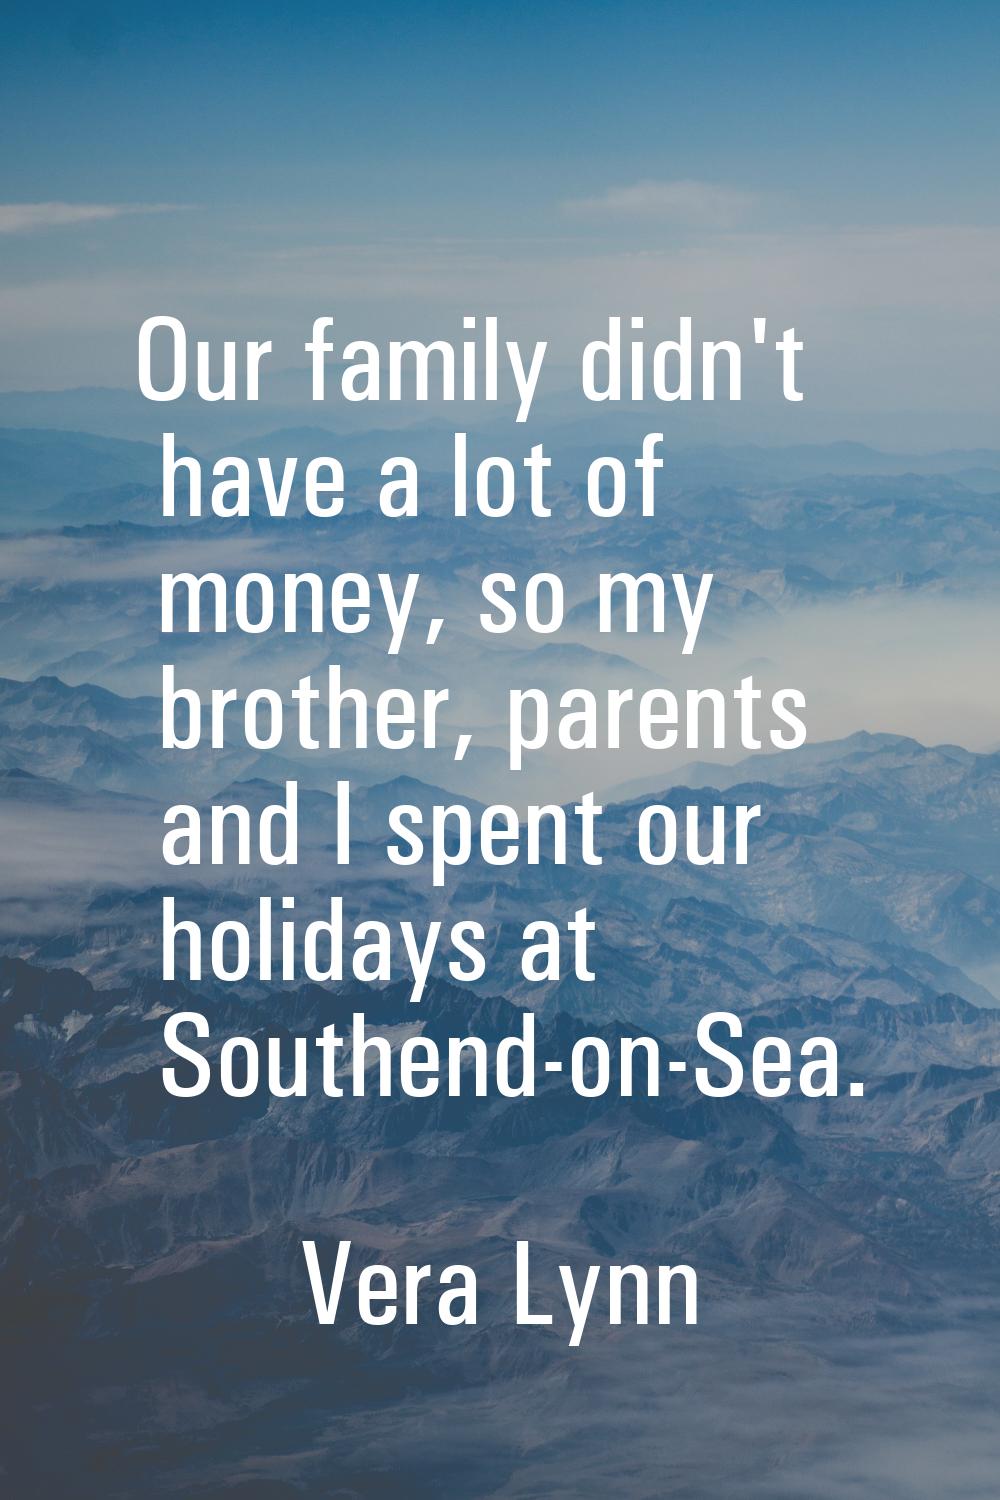 Our family didn't have a lot of money, so my brother, parents and I spent our holidays at Southend-